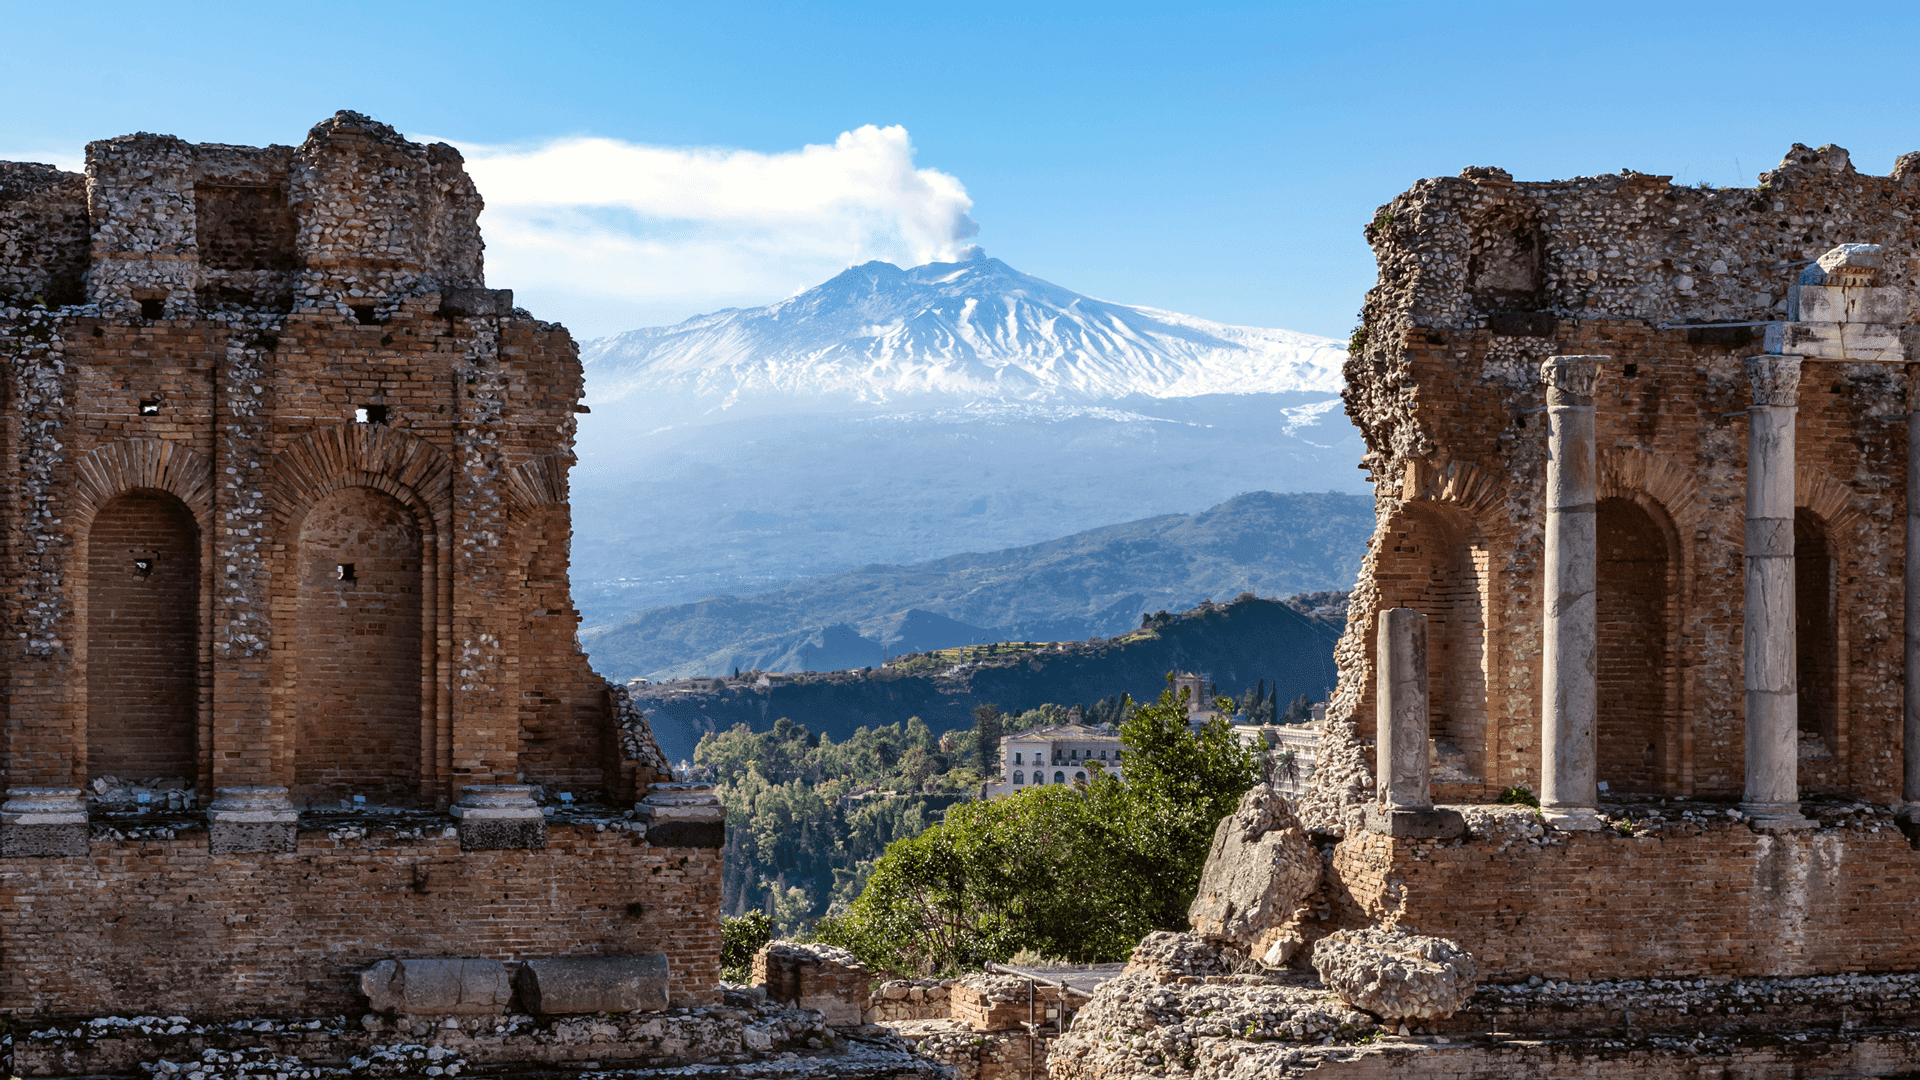 Mount Etna framed by the ruins of the Taormina amphitheatre